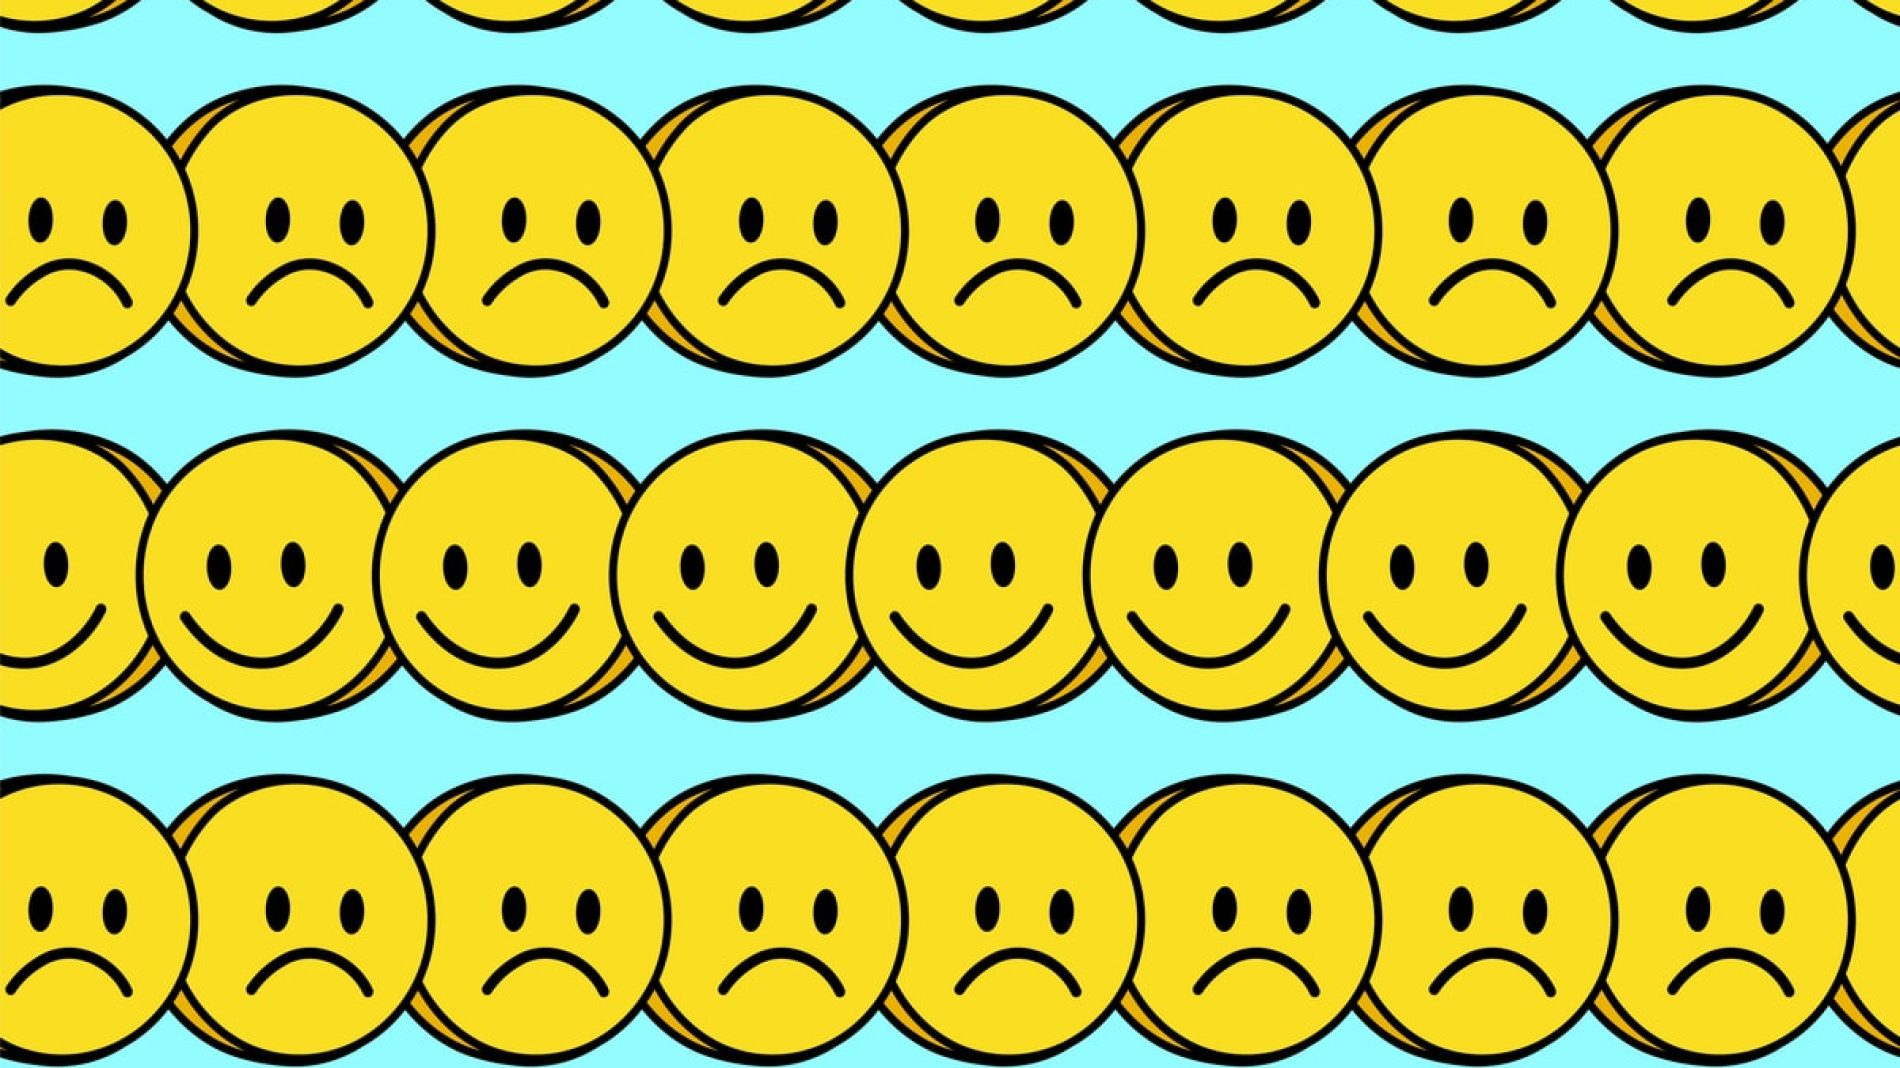 Cartoon drawing of rows of yellow smiley faces, with alternating rows of smiling and frowning faces, meant to represent the possibility of having a good trip or bad trip while taking acid